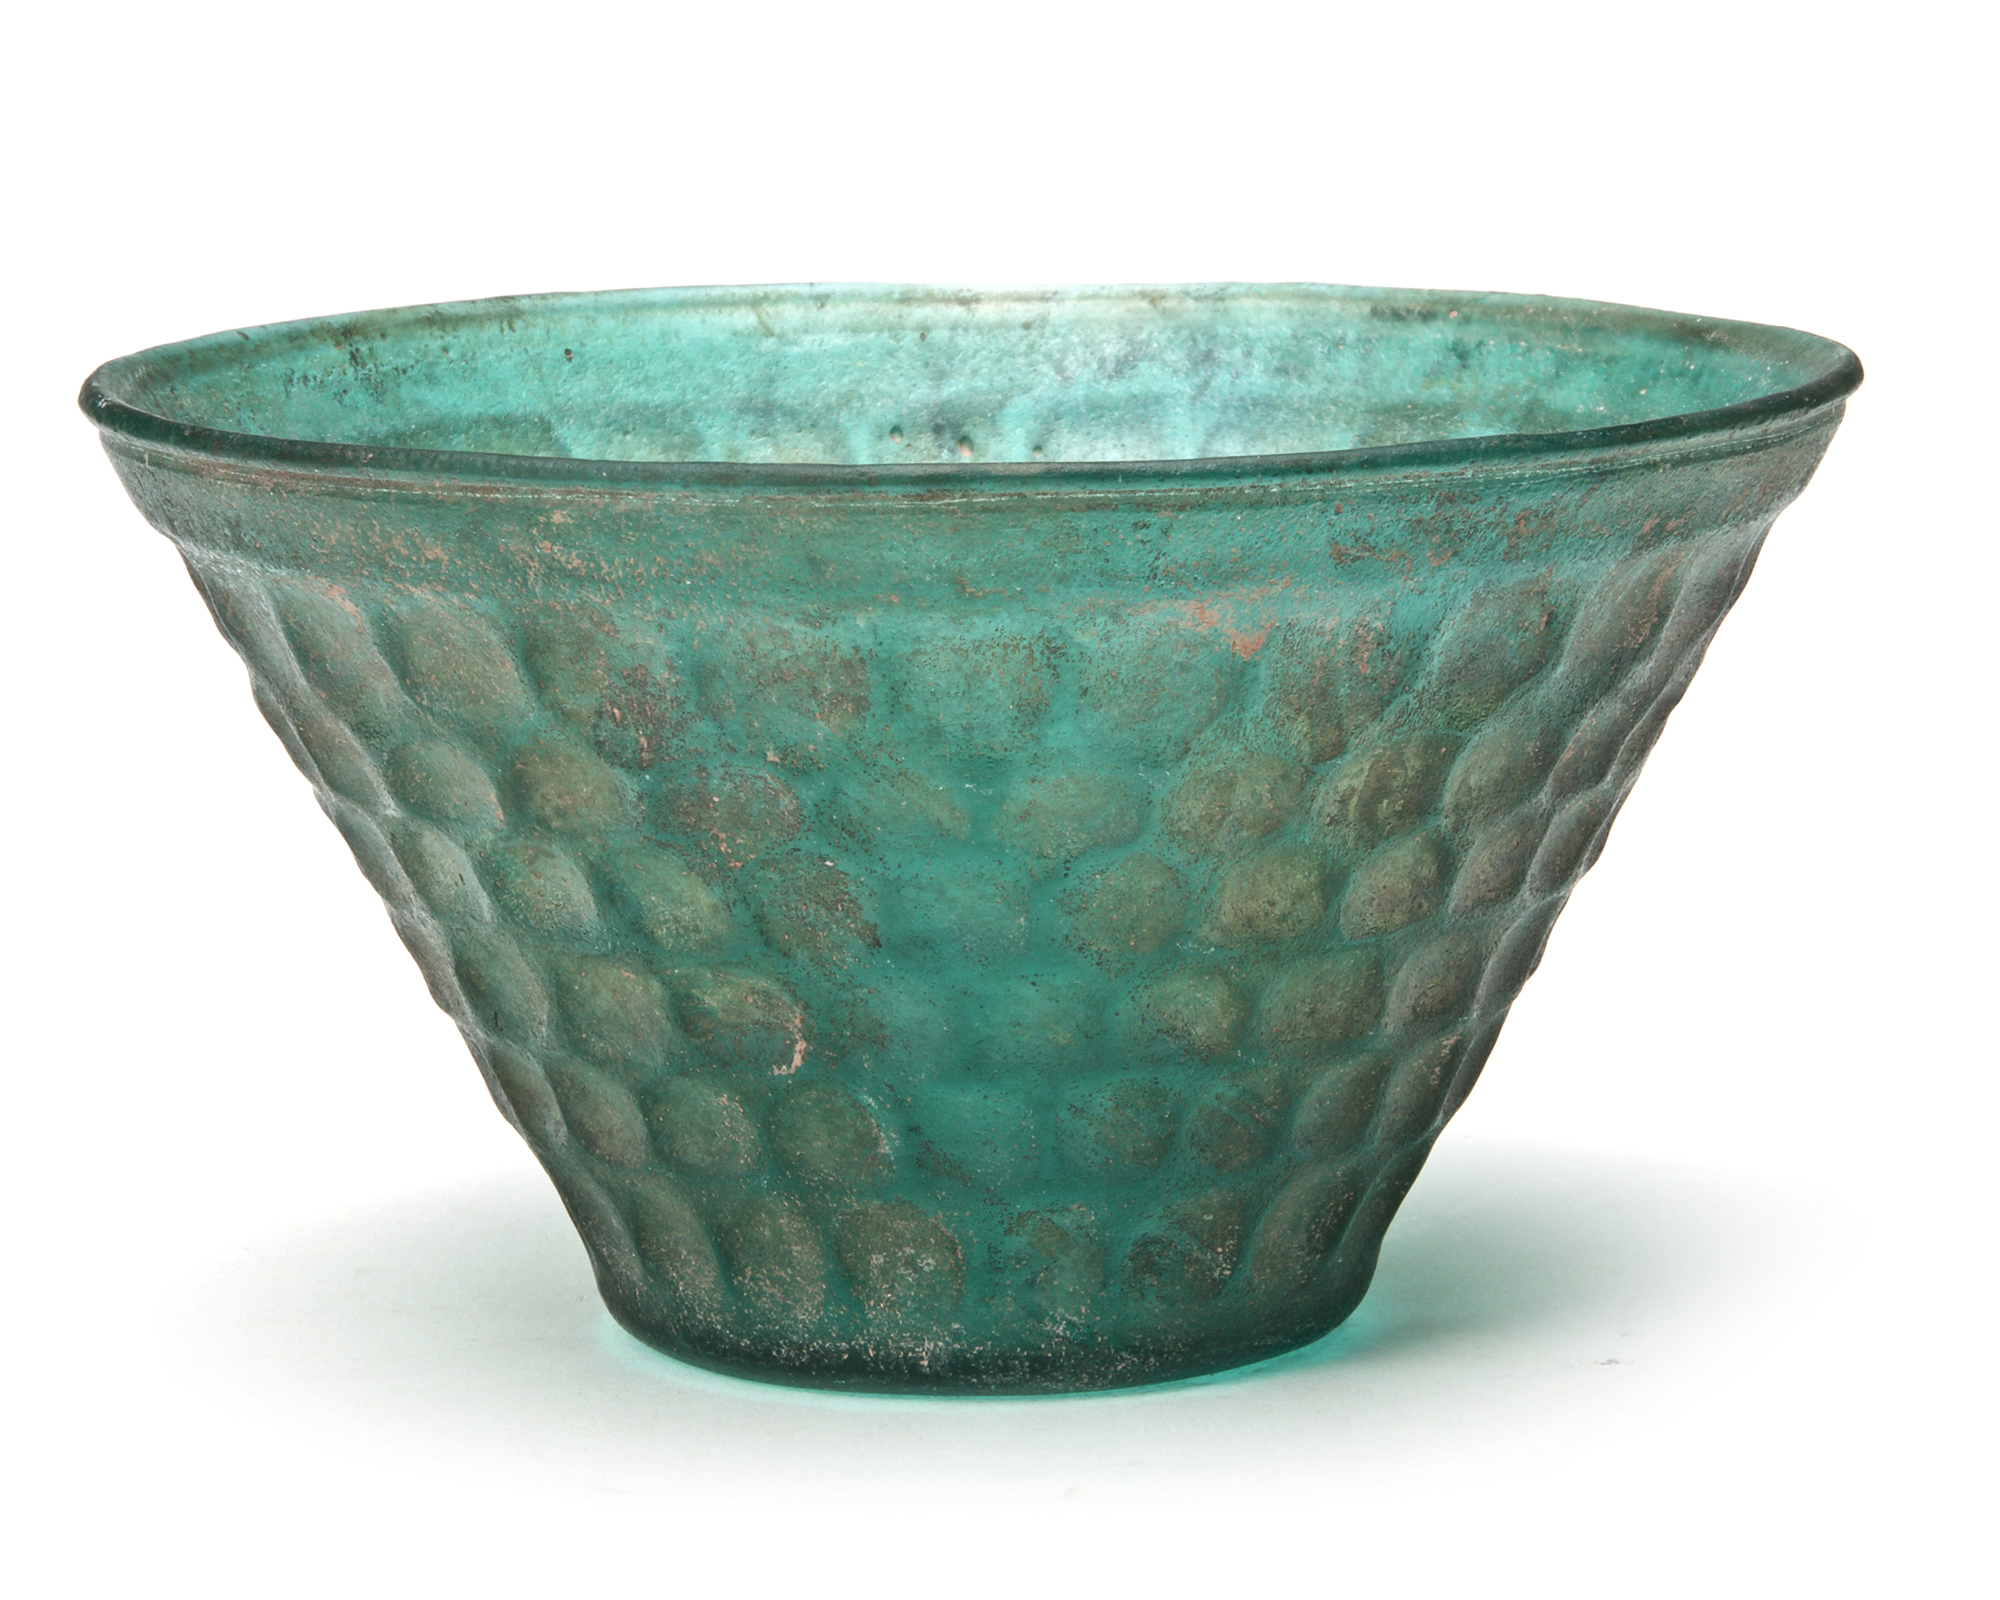 A PERSIAN GREEN CUT GLASS BOWL, 8TH-9TH CENTURY - Image 2 of 10